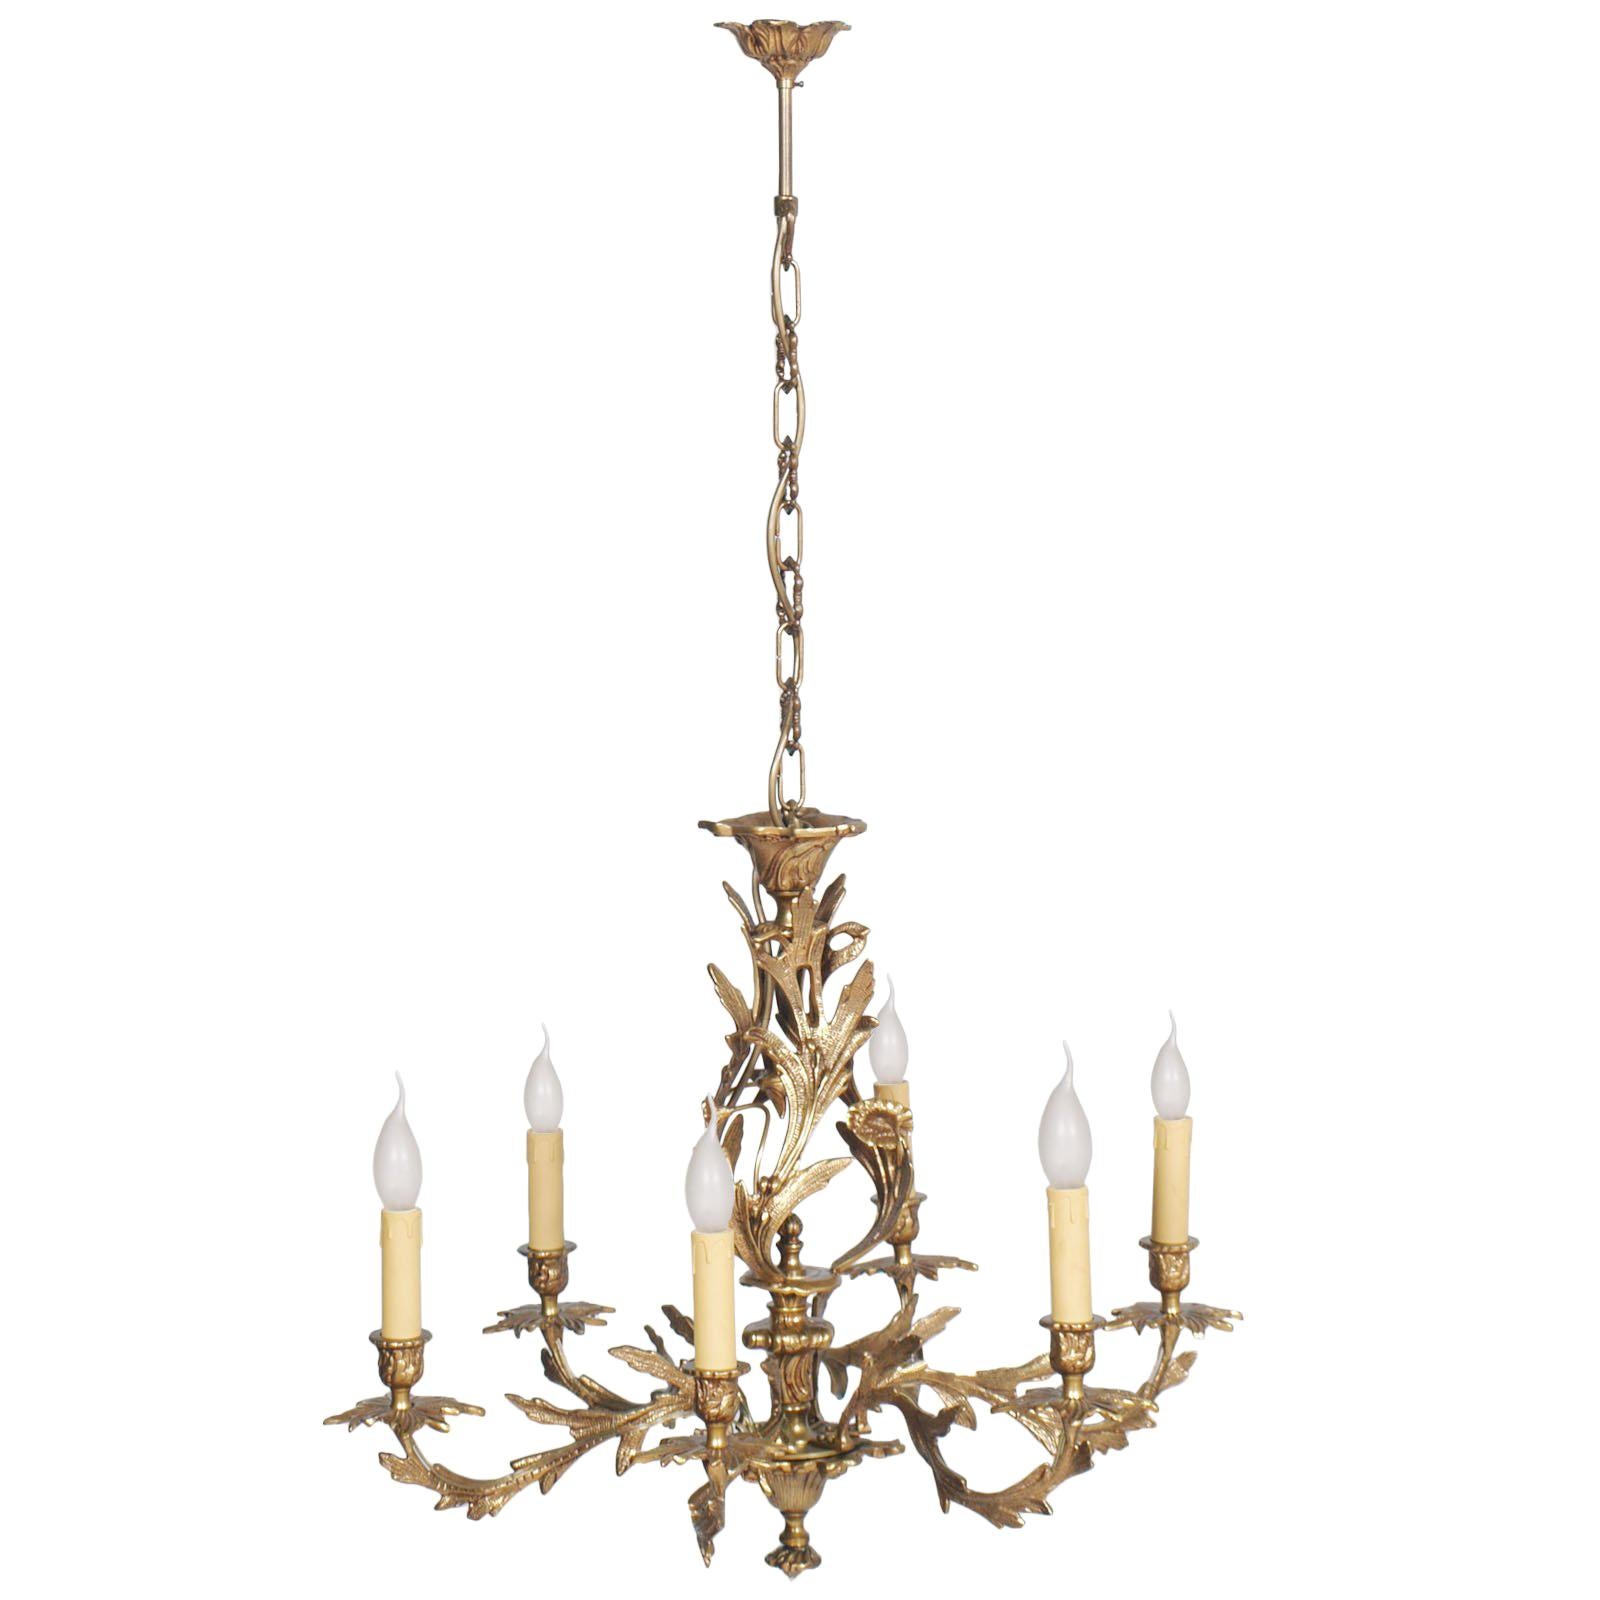 Antique Very Heavy Chandelier from a Old Candlestick, Gilded Bronze, Six Lights